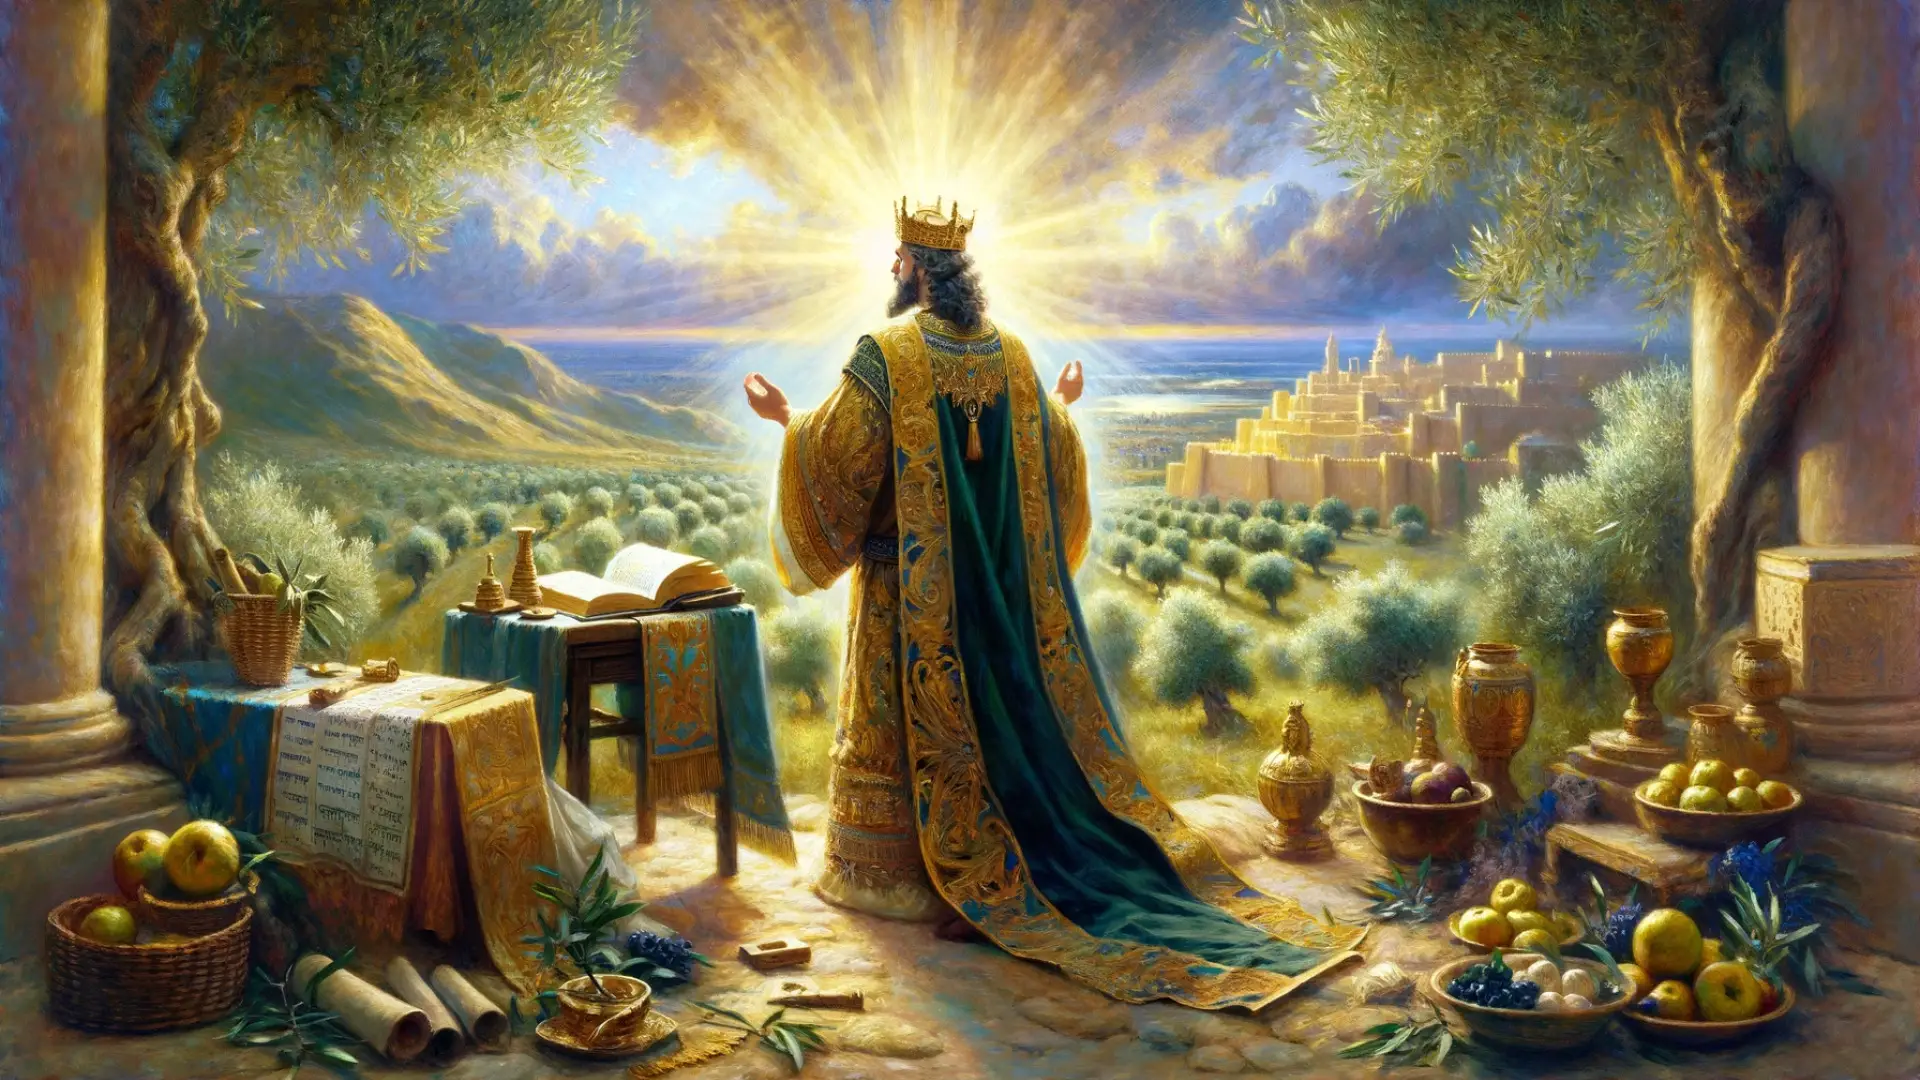 1 Kings Chapter 9 Summary: Solomon’s Reign and Divine Pact